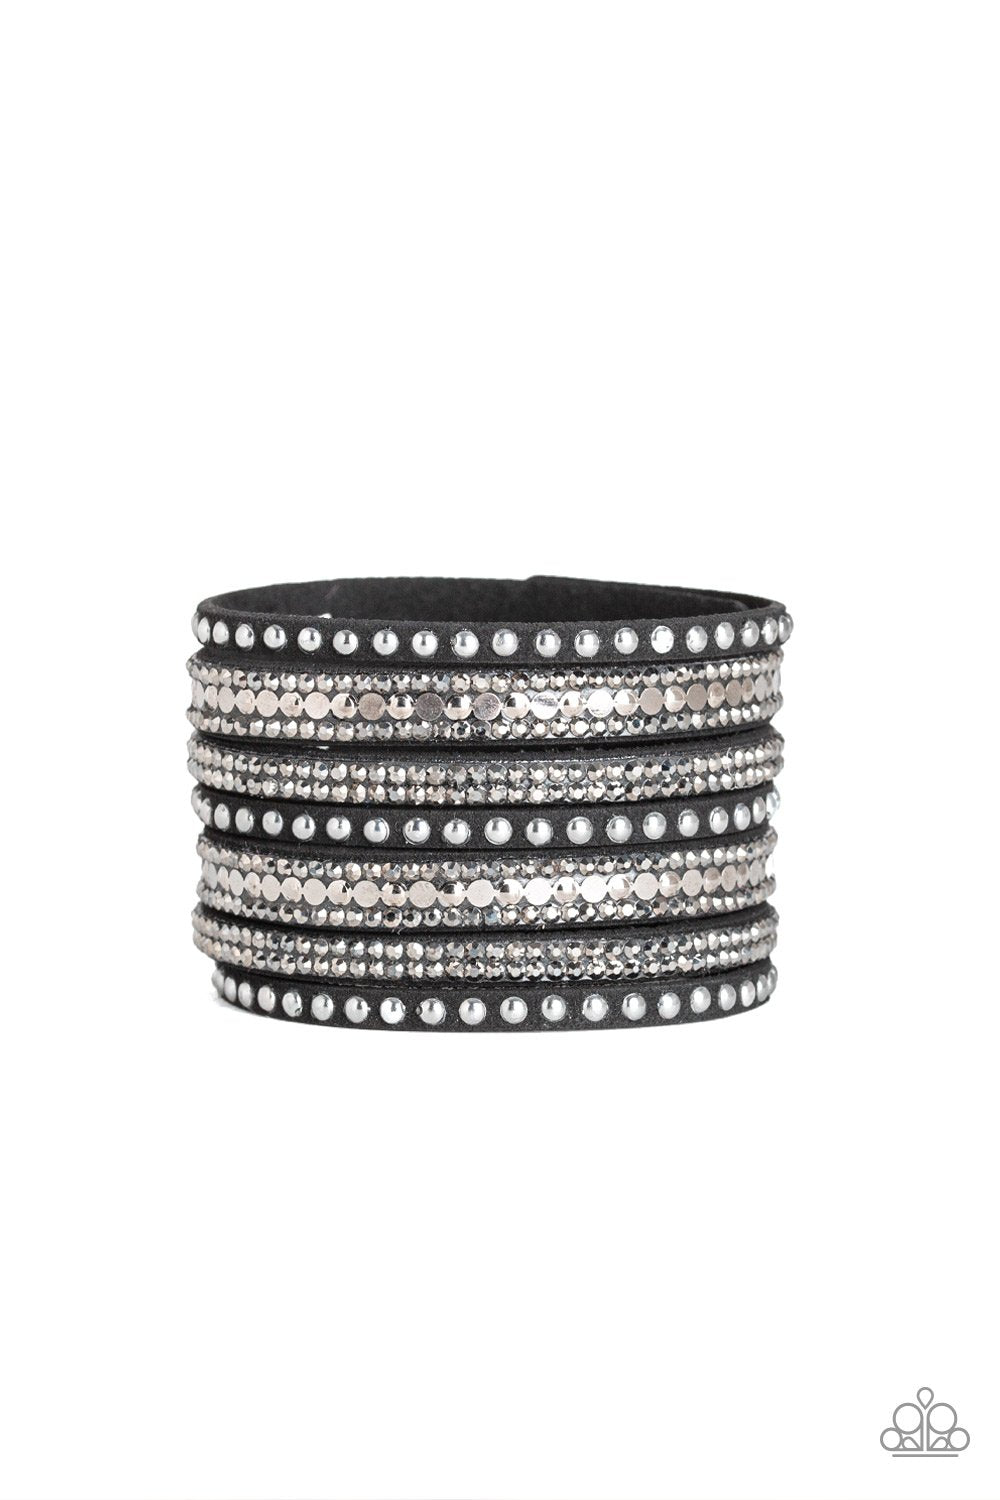 All Hustle and Hairspray Black Urban Wrap Snap Bracelet - Paparazzi Accessories-CarasShop.com - $5 Jewelry by Cara Jewels